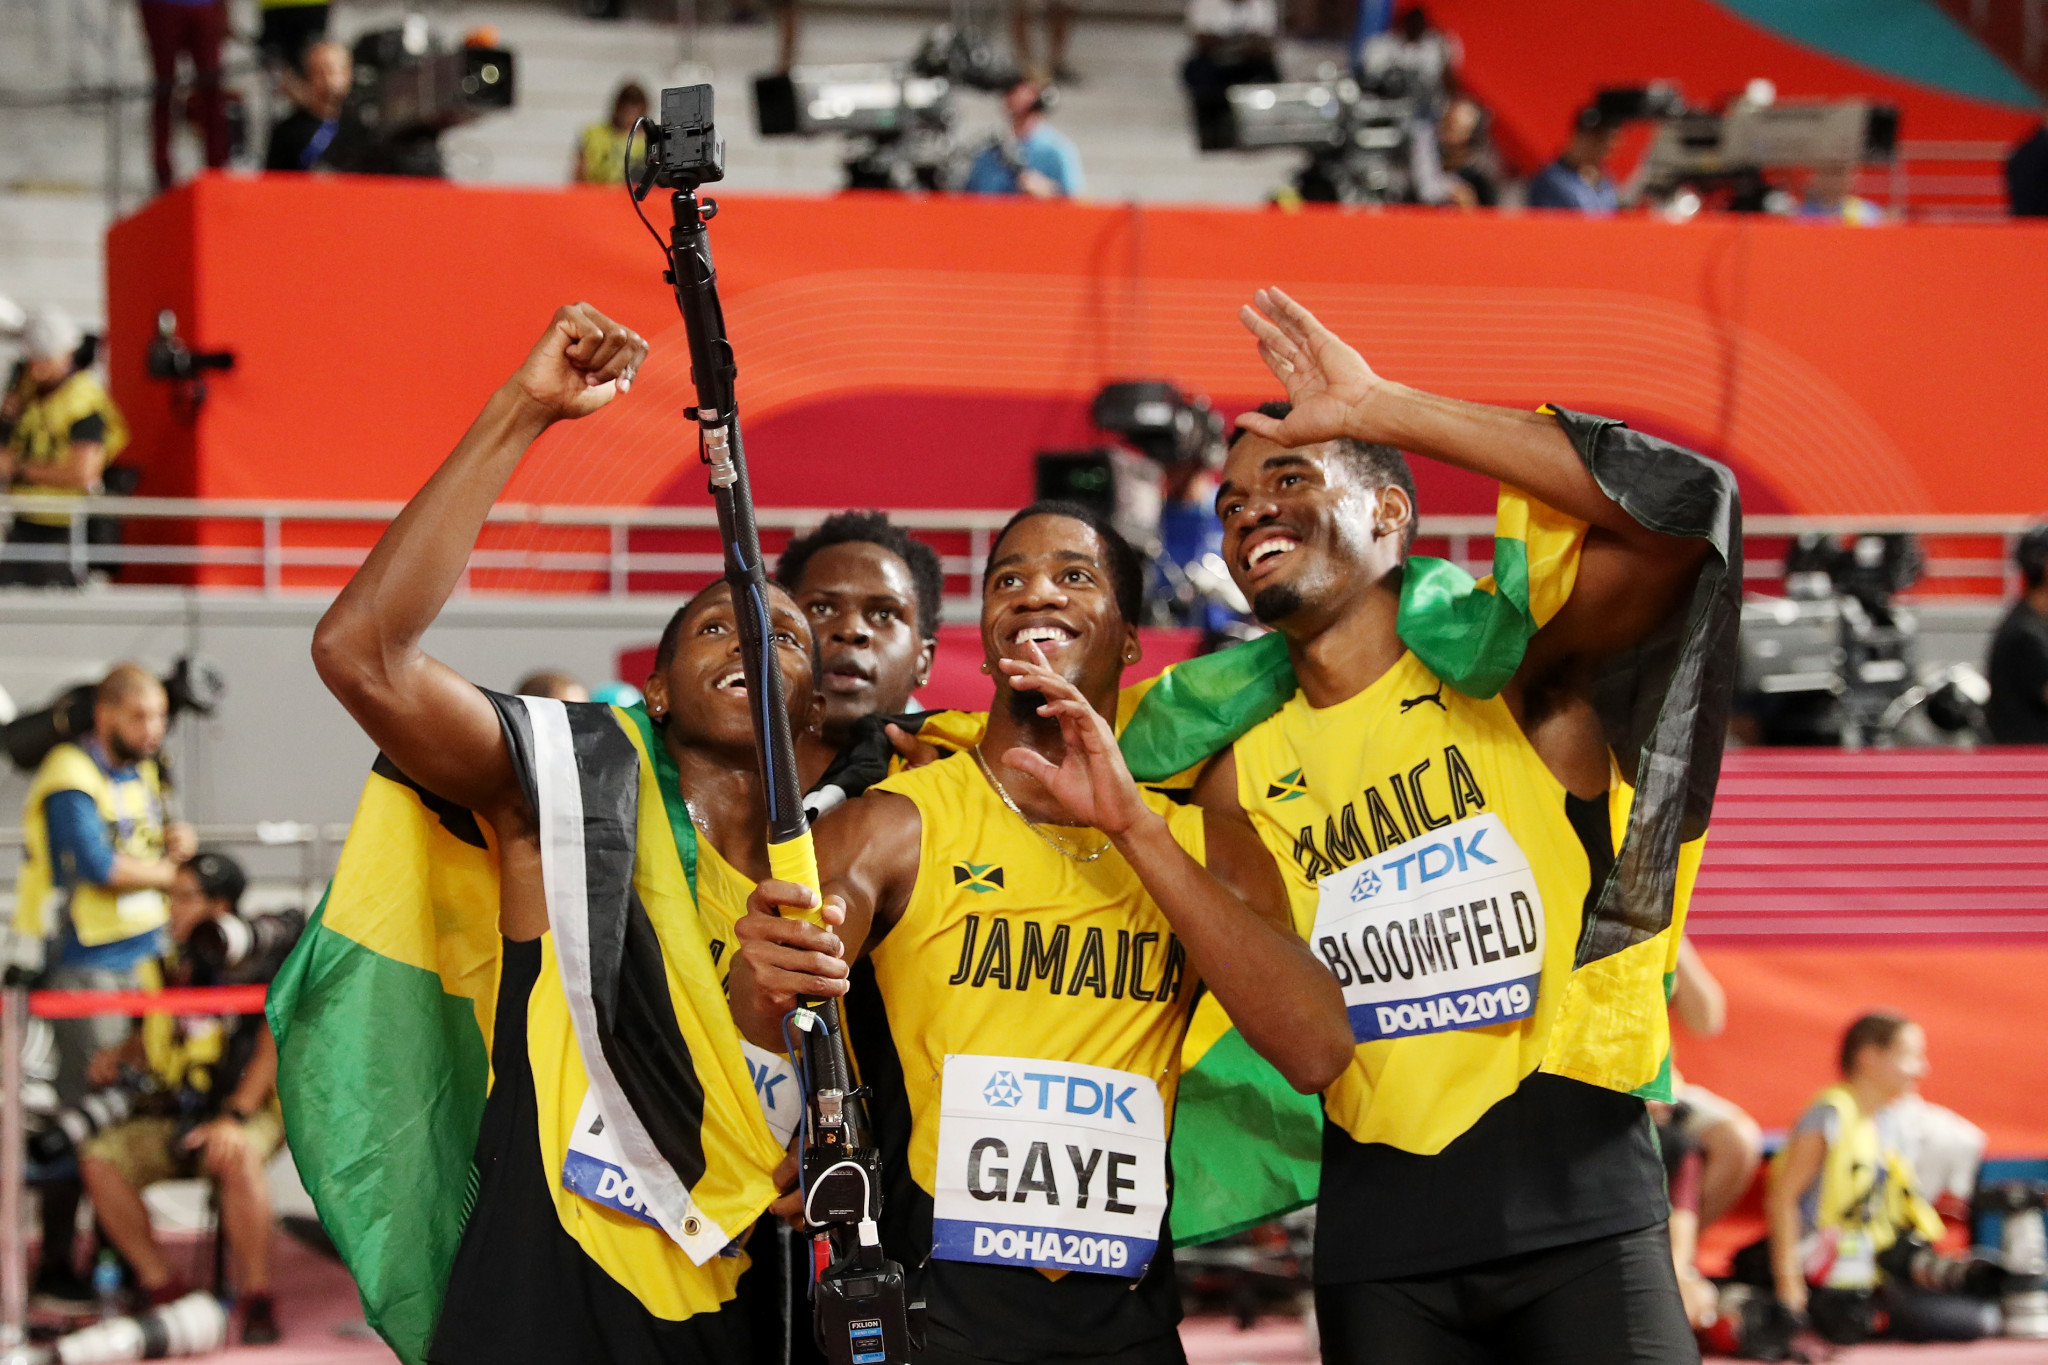 Jamaica marked their silver medal in the men's 4x400m relay with a selfie ©Getty Images